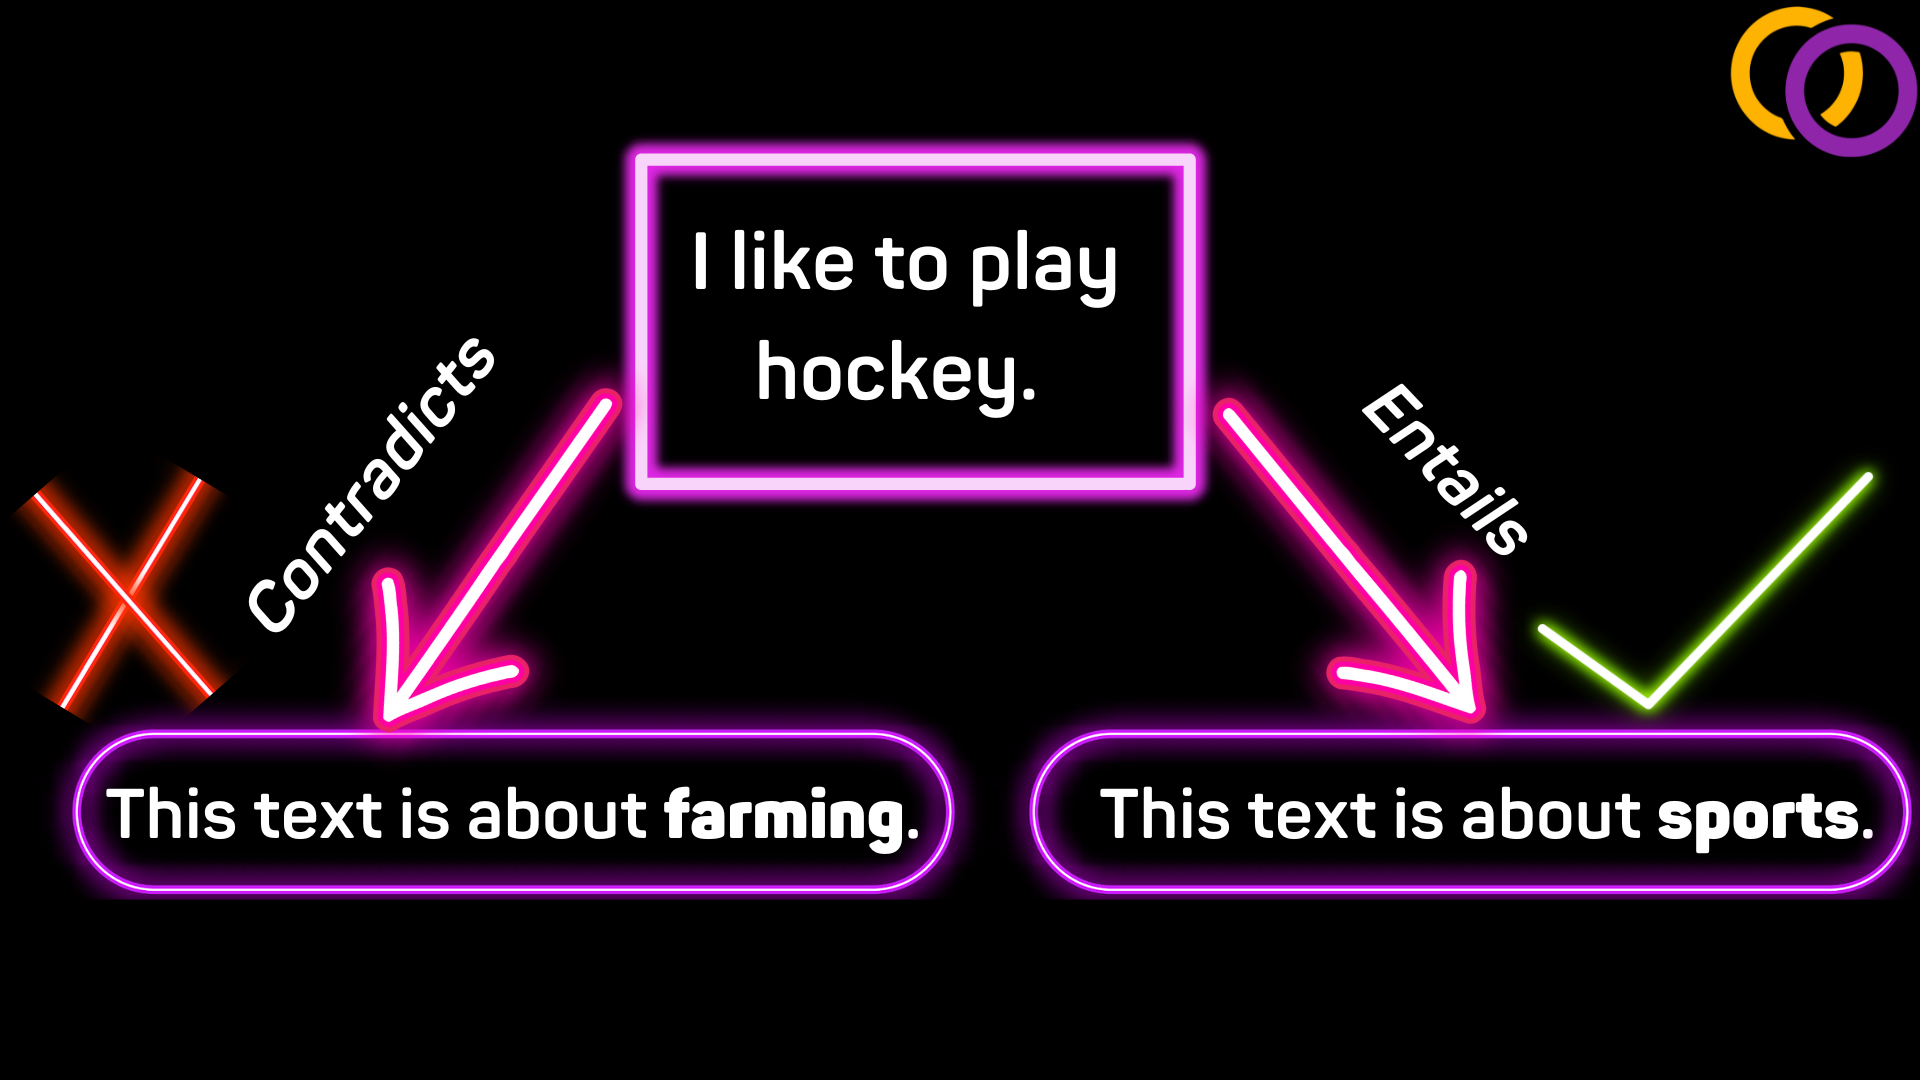 Shows how the text "This text is about sports" entails "I like to play hockey. " and the text "This text is about farming" contradicts "I like to play hockey."